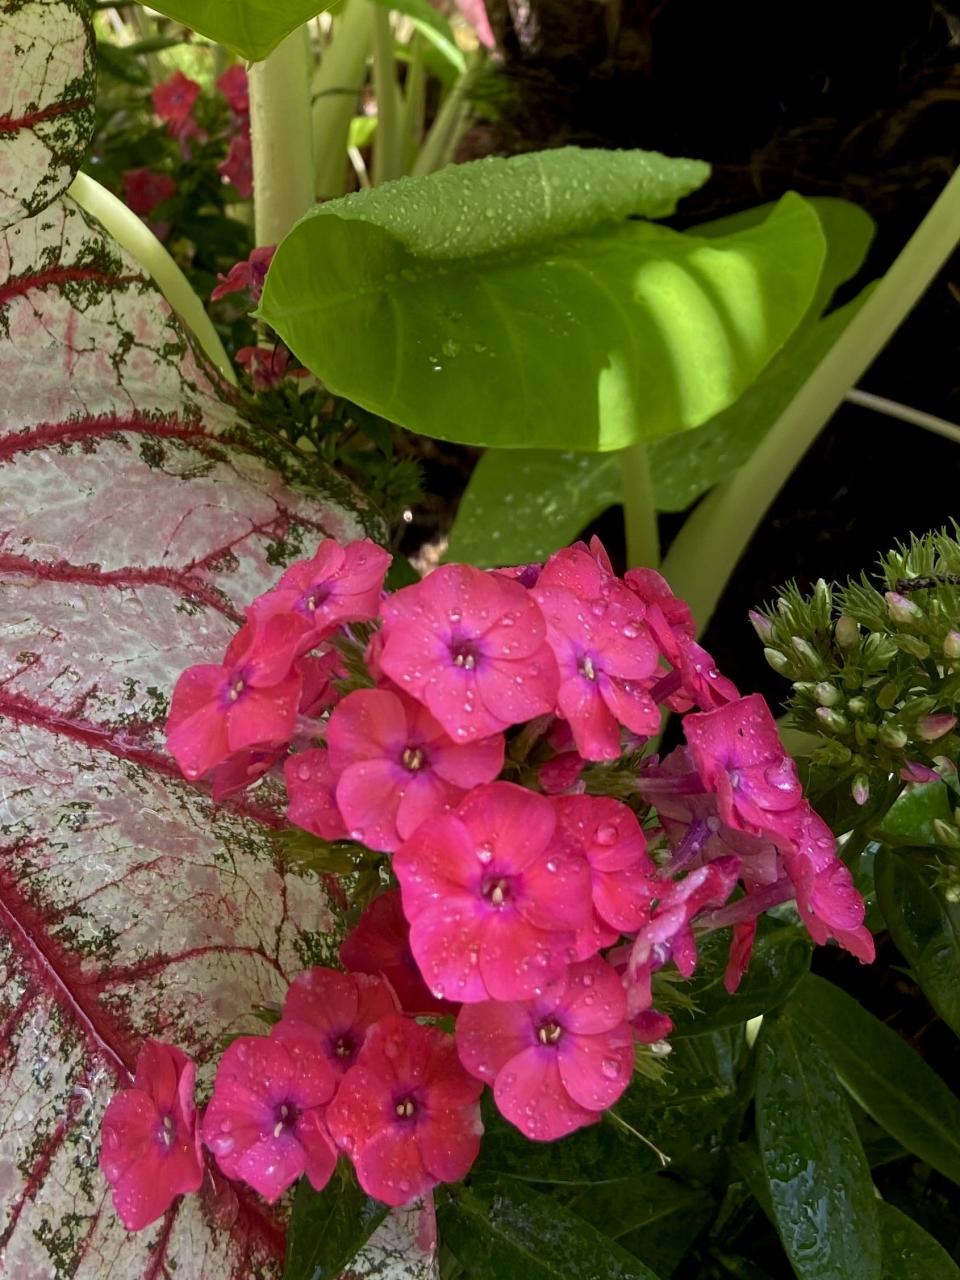 The colors of Heart to Heart, Bottle Rocket caladiums echo the rich color of Luminary Sunset Coral tall garden phlox.